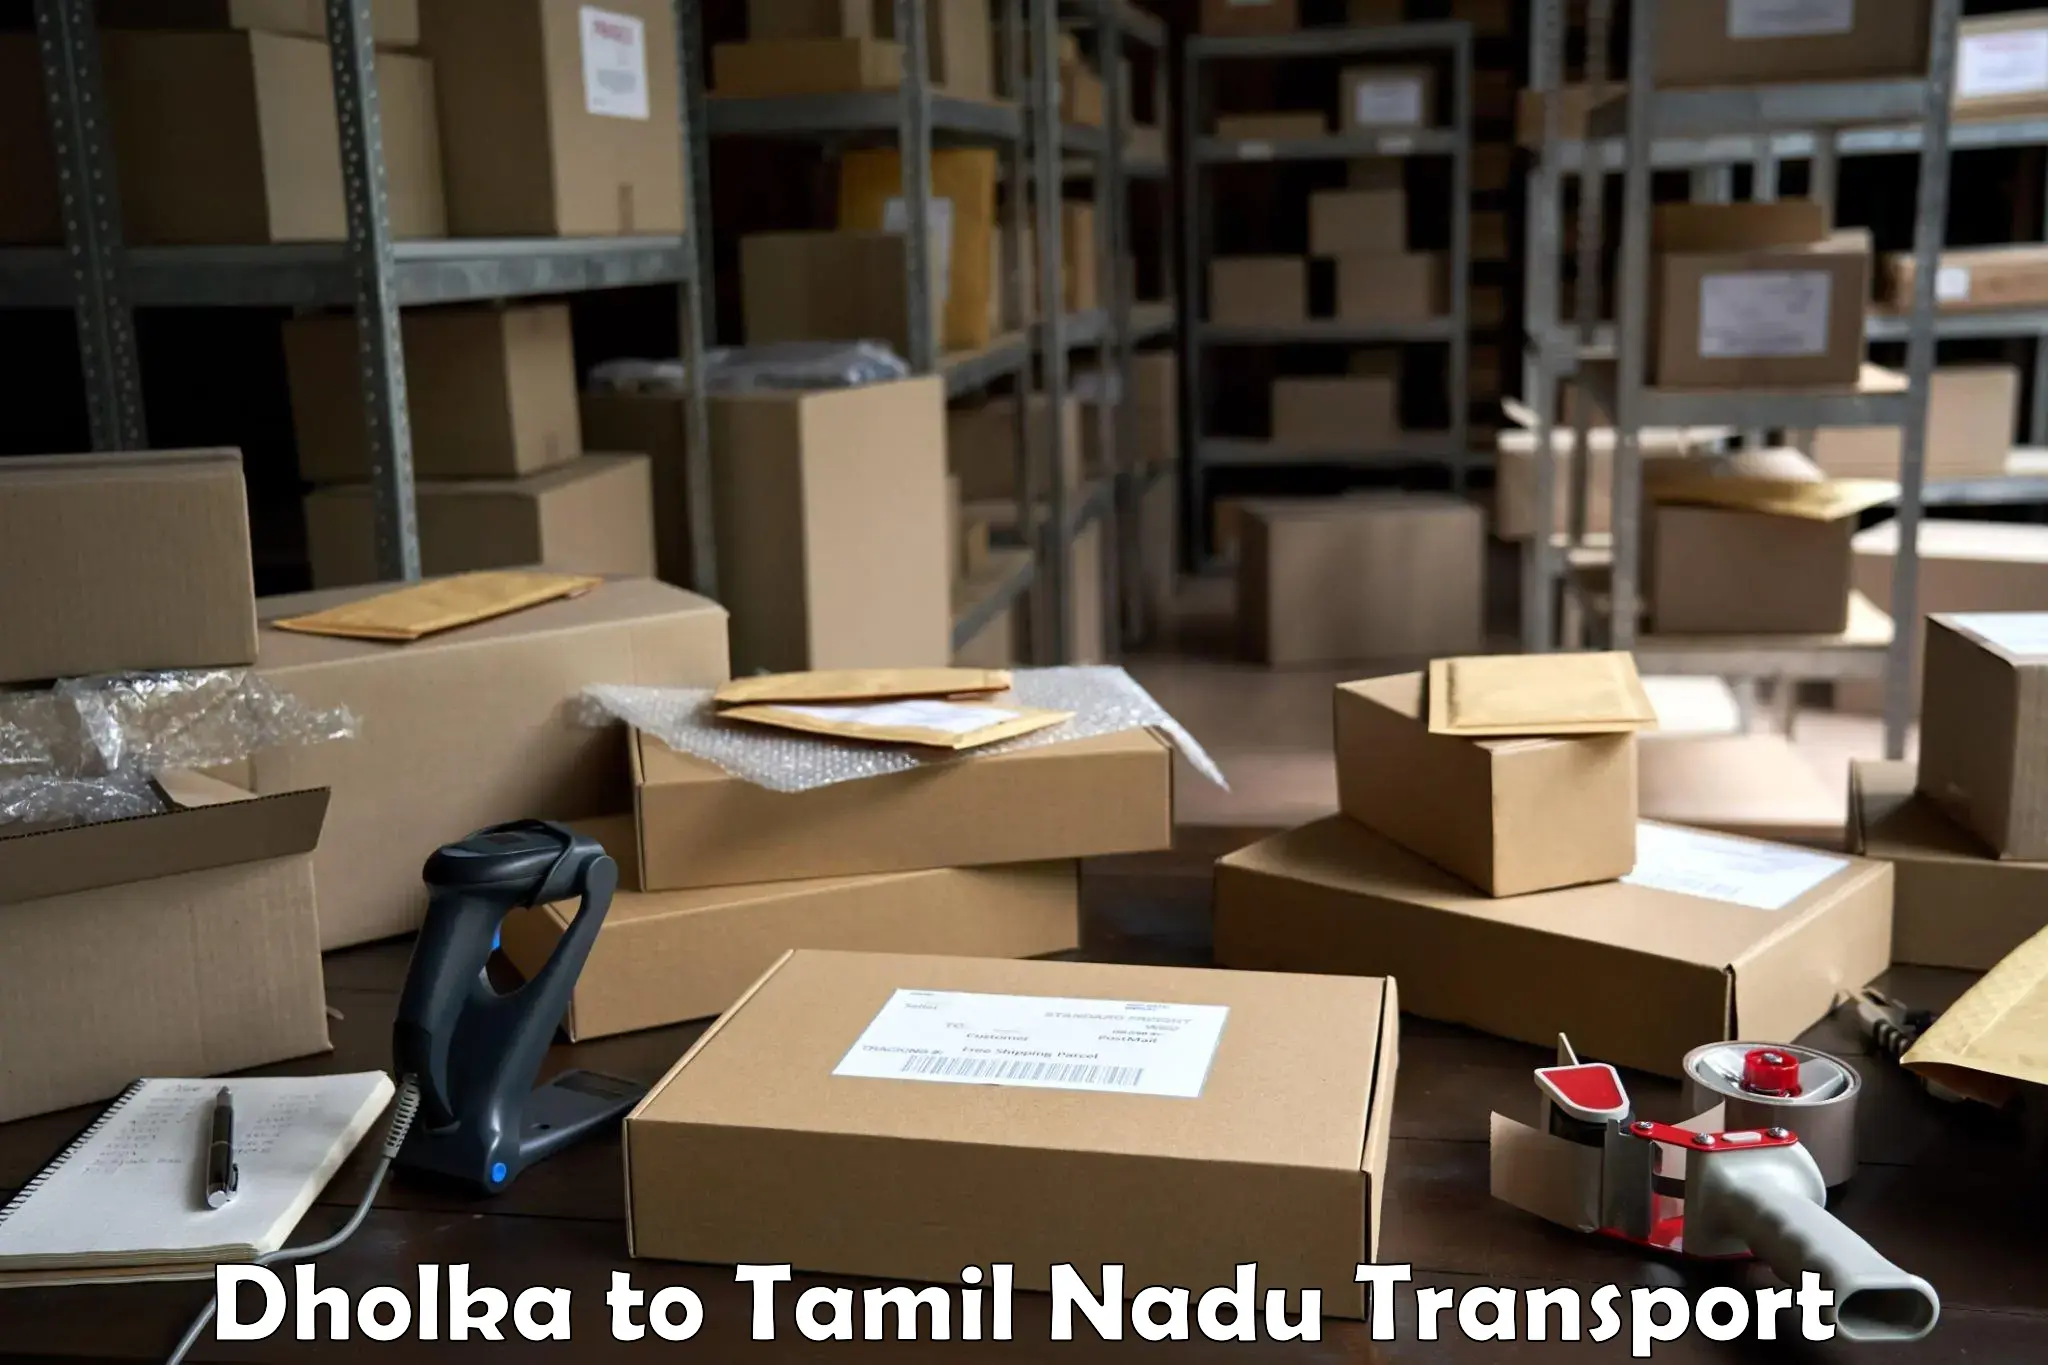 Bike shipping service Dholka to Mylapore